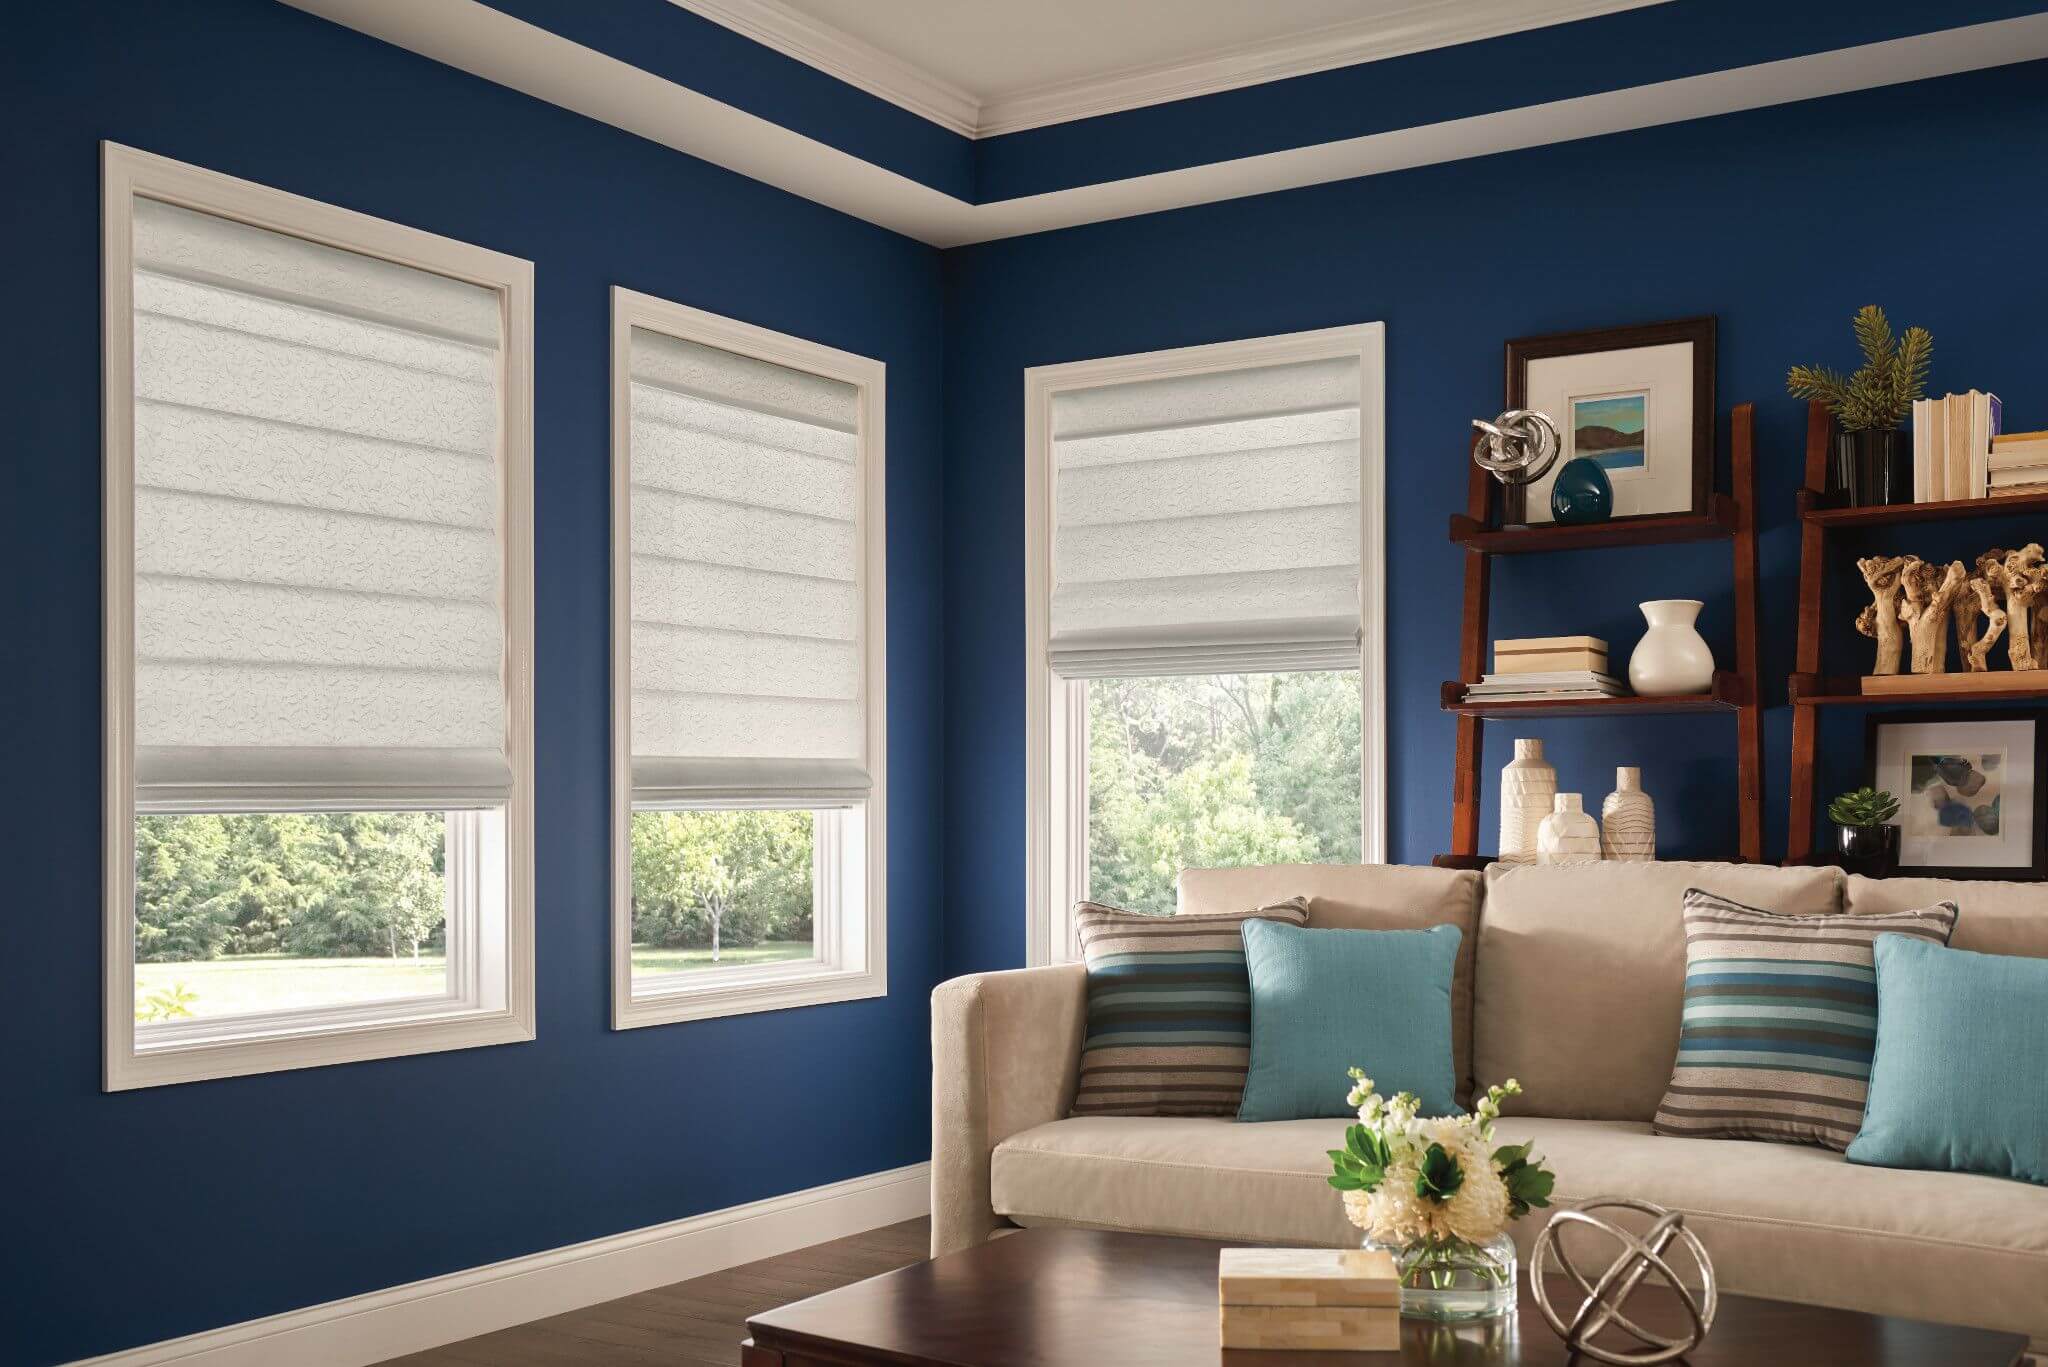 Graber 3271 Roman Shades | types of shades for windows